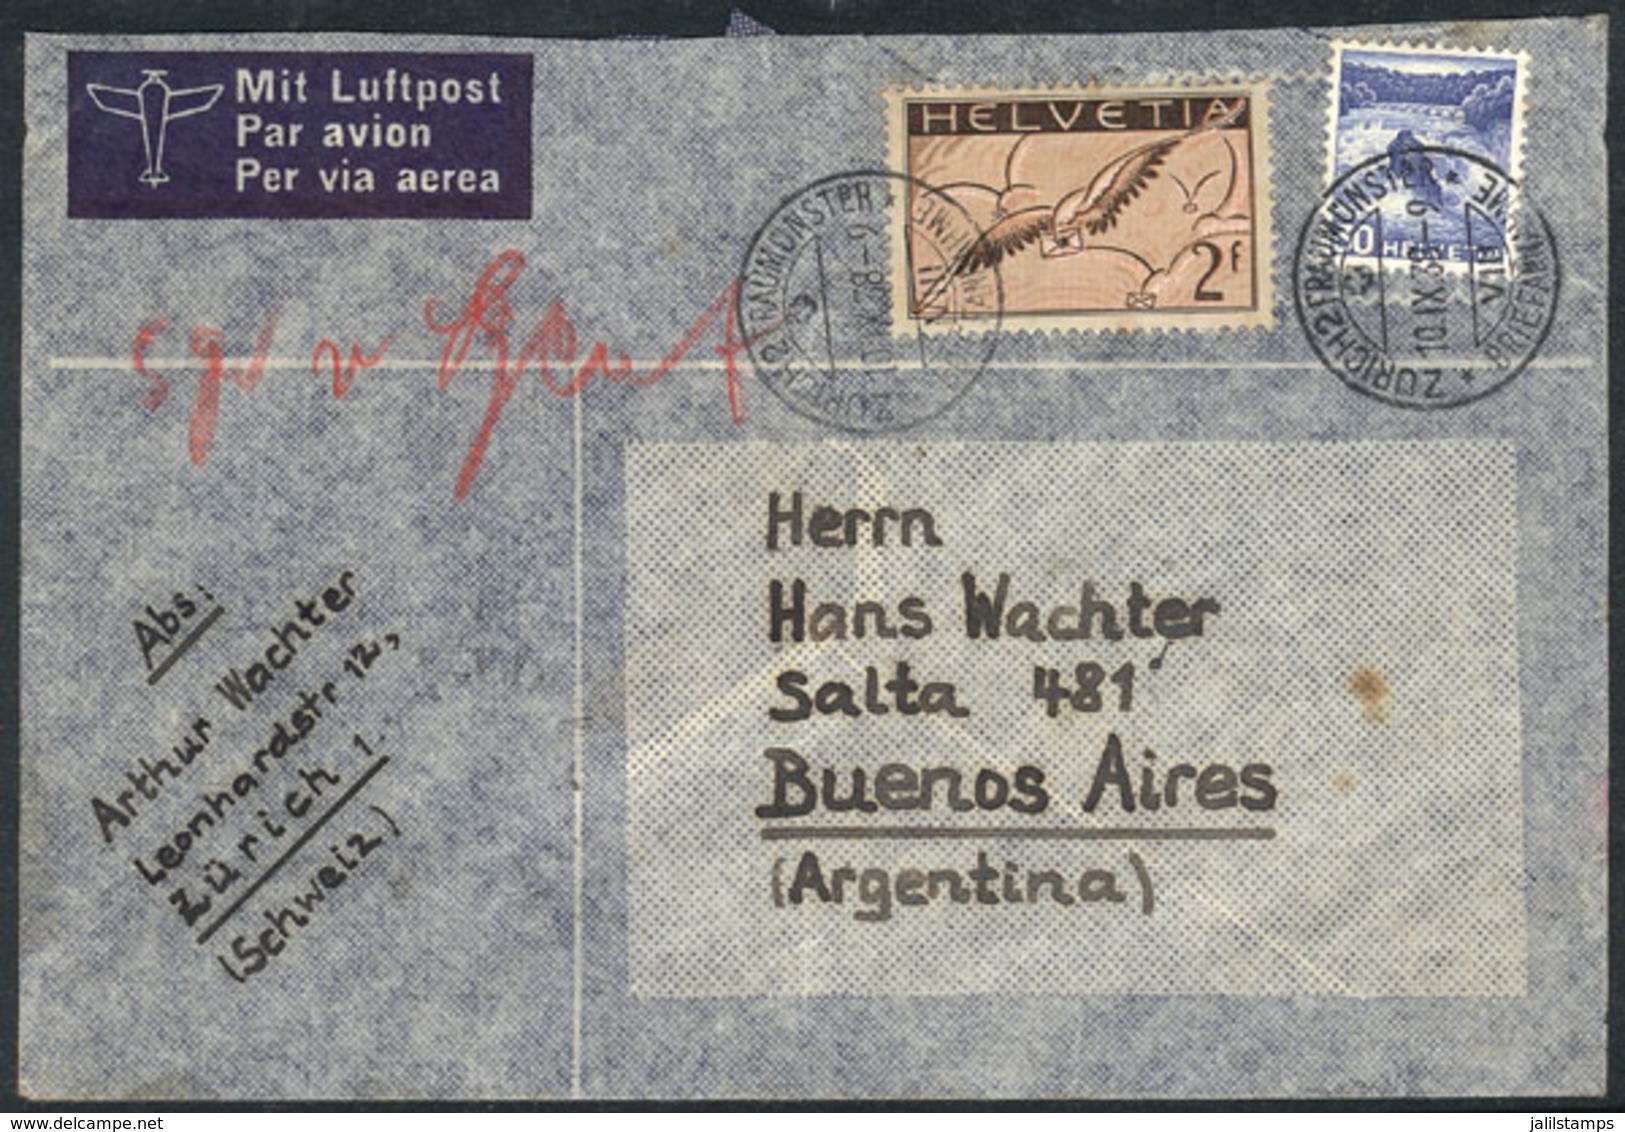 885 SWITZERLAND: Airmail Cover Franked With 2.30Fr., Sent From Zürich To Argentina On 10/SE/1938, VF! - ...-1845 Voorlopers